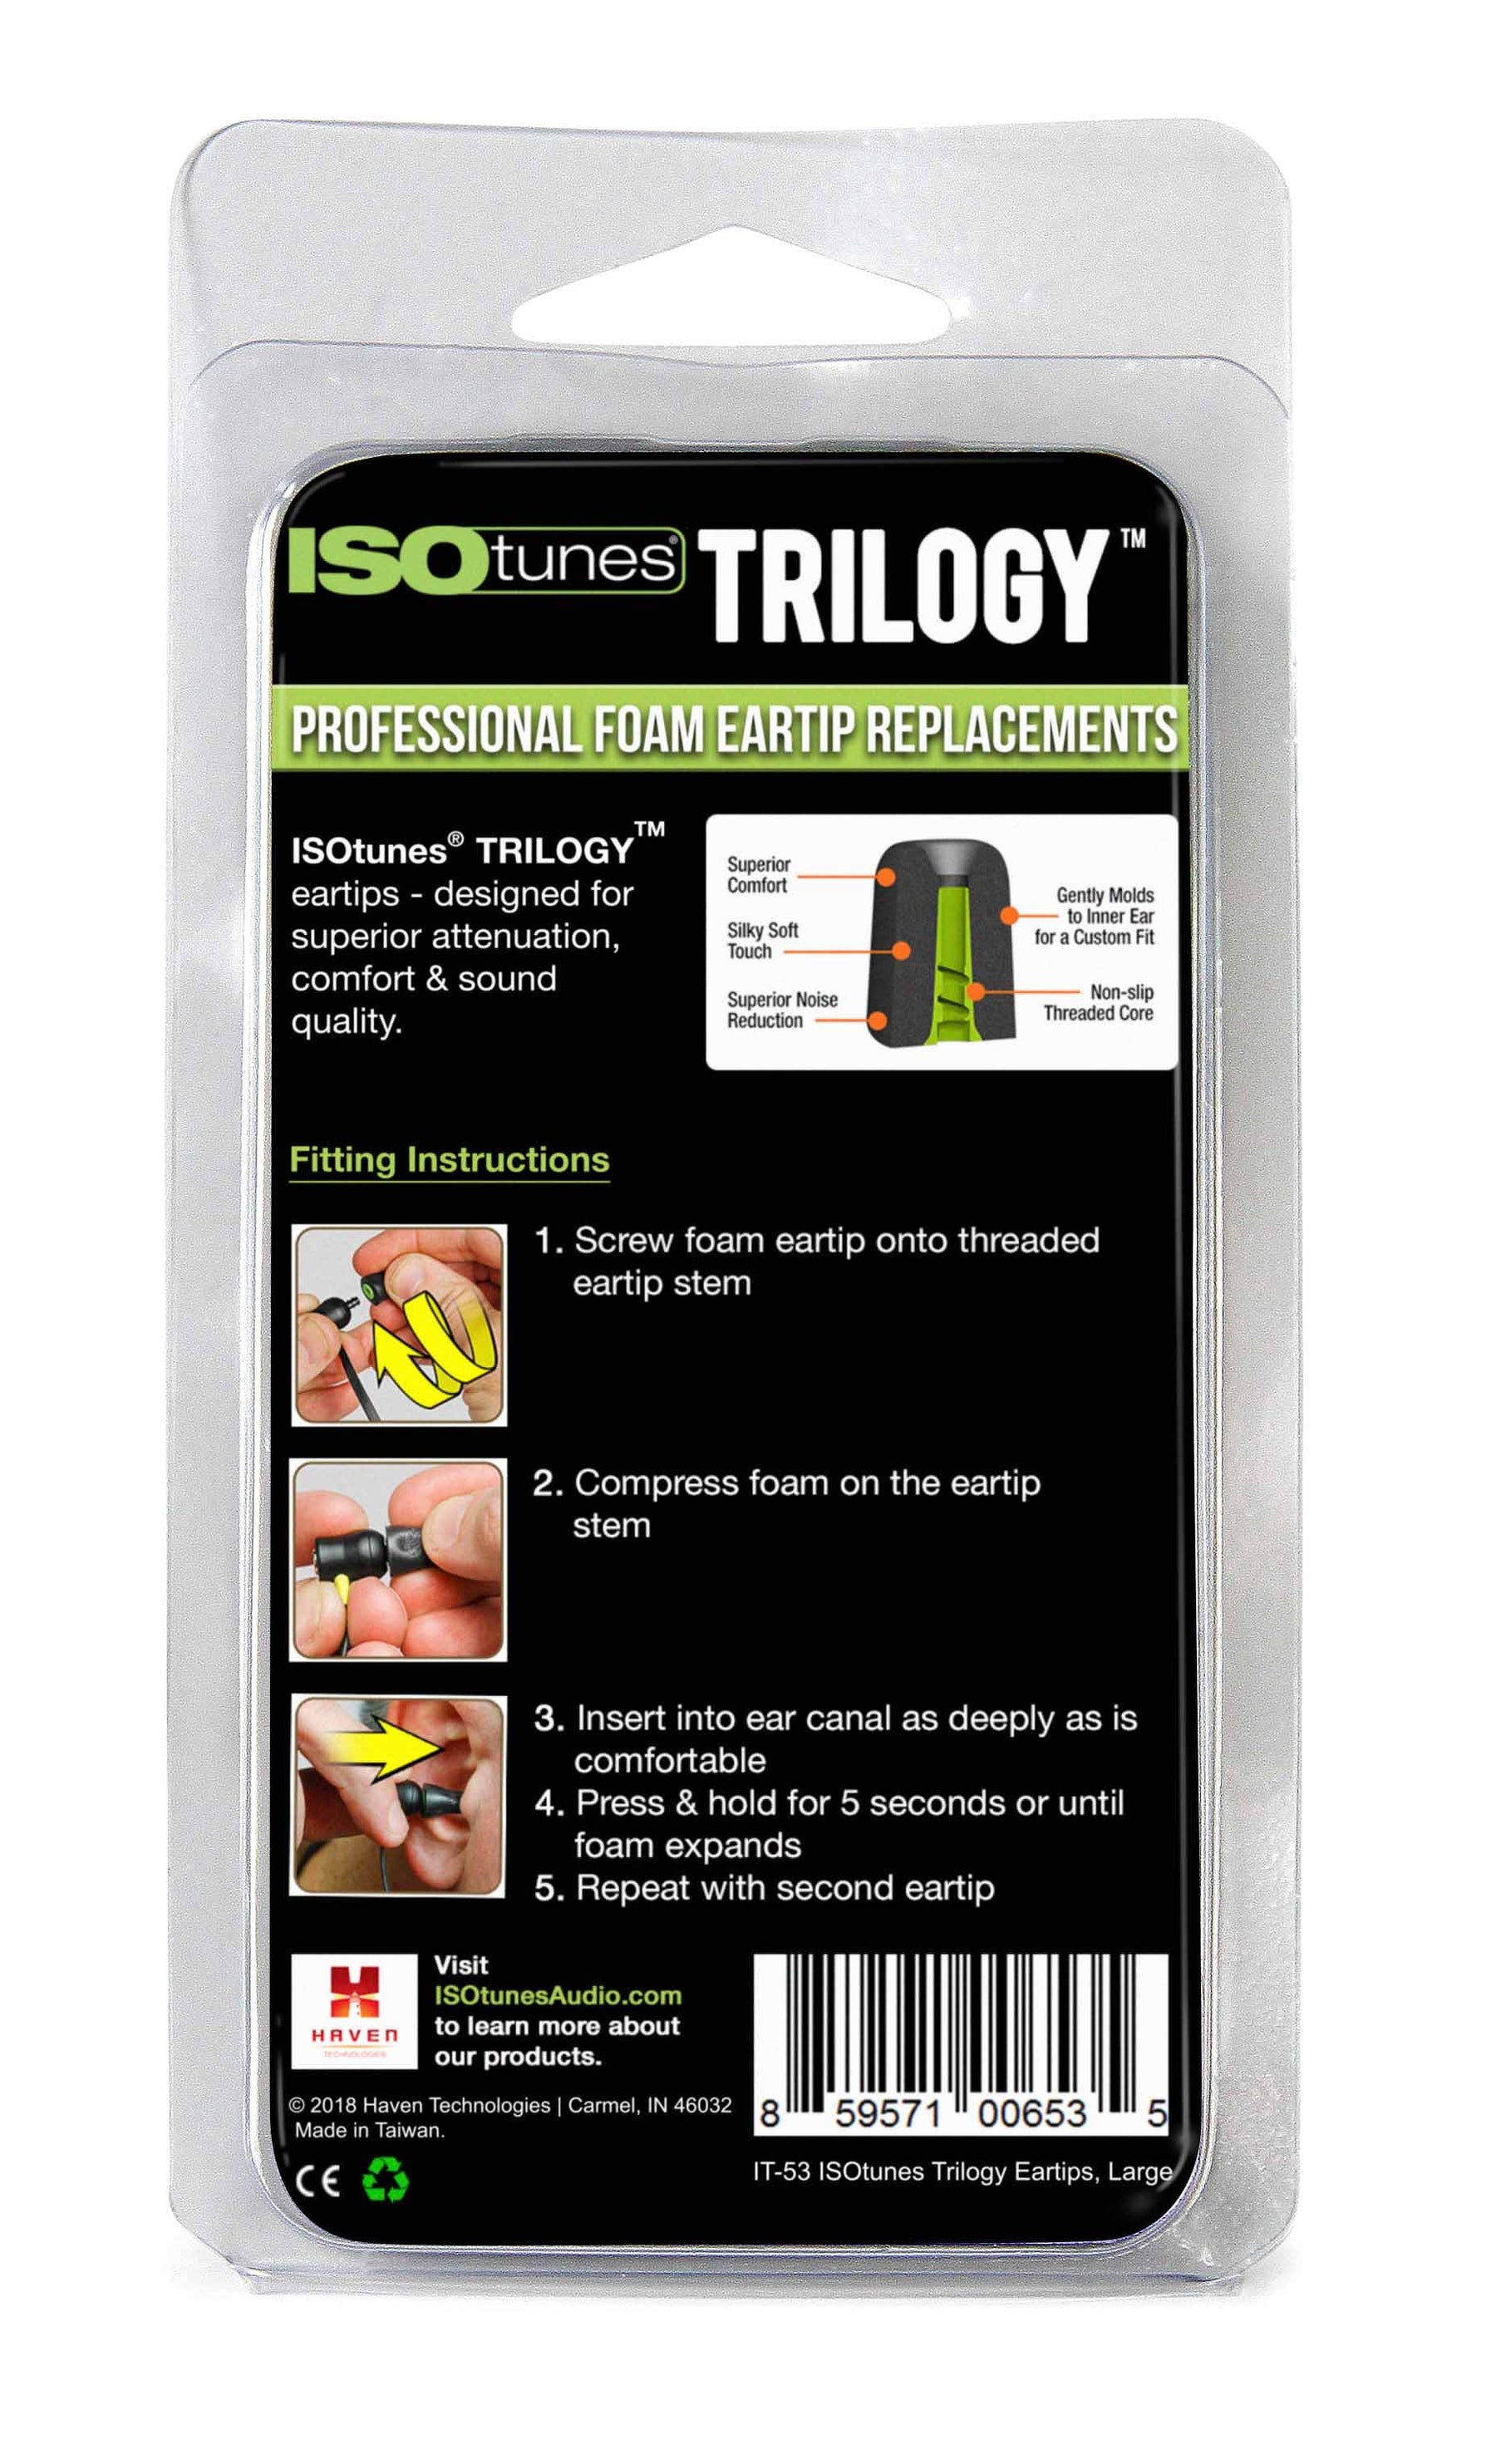 ISOtunes Replacement Tips ISOtunes TRILOGY™ Foam Replacement Eartips (5 pair pack)